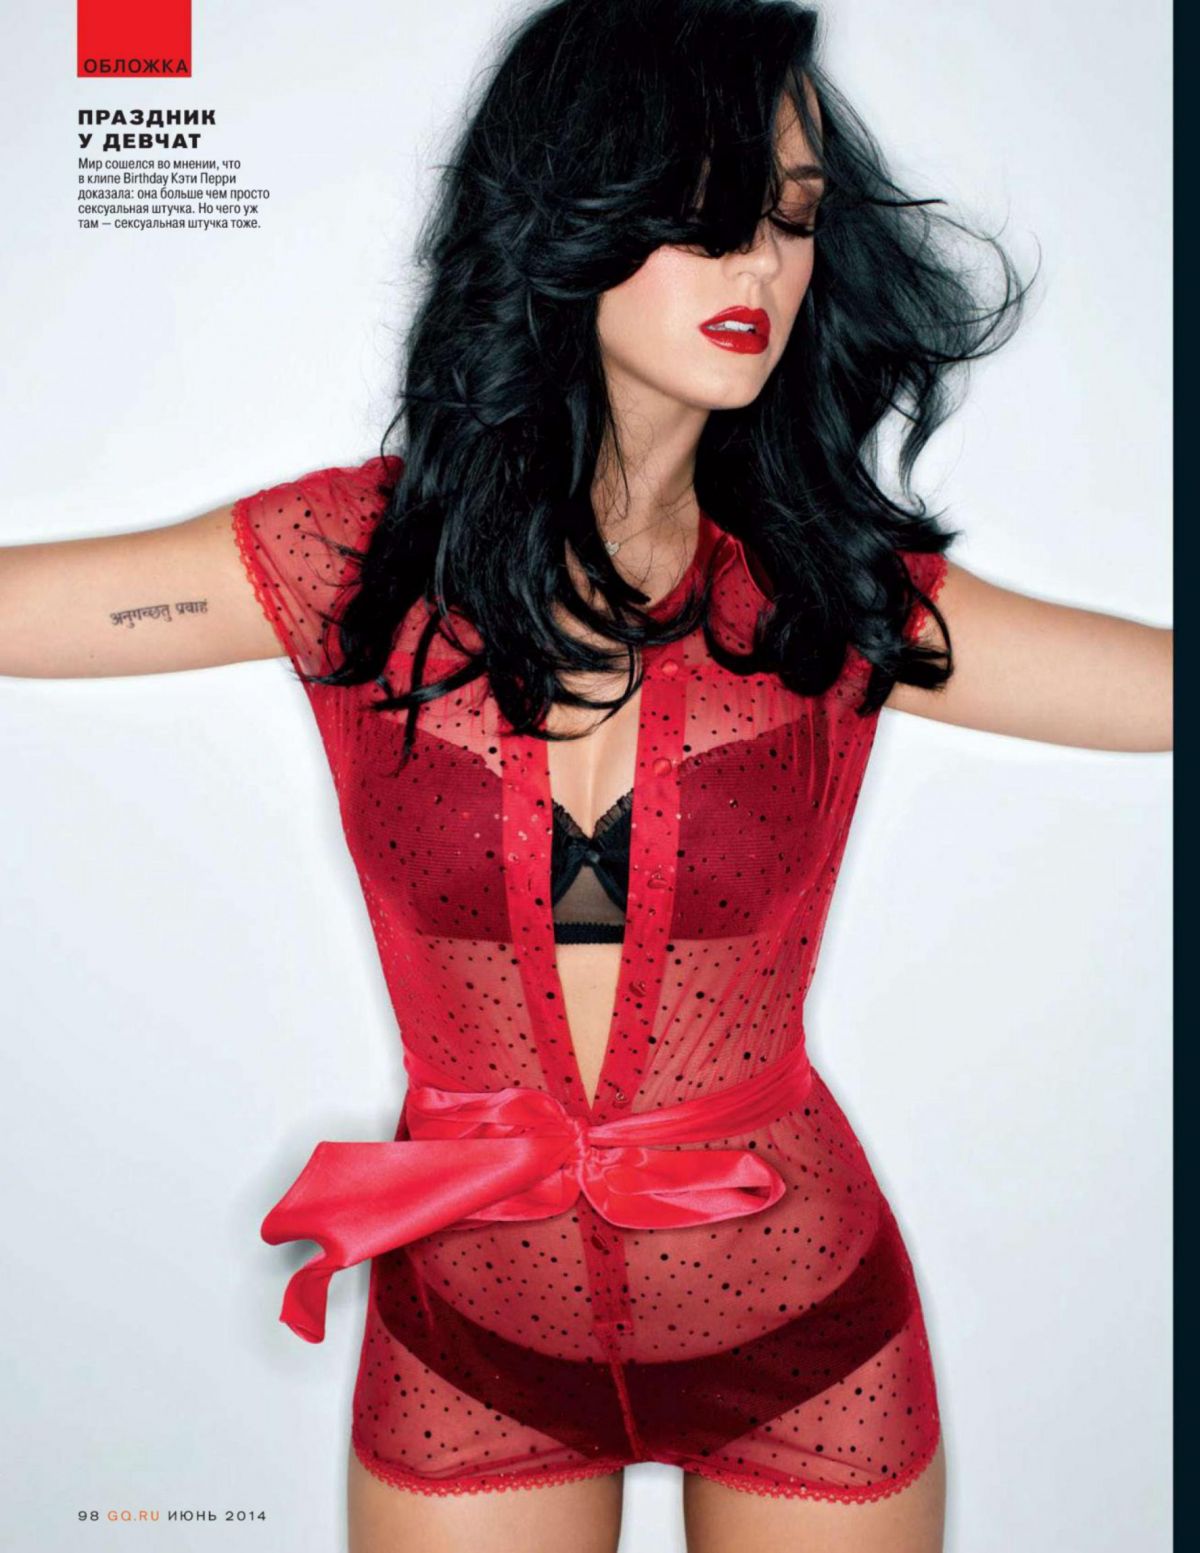 Katy Perry for GQ | 188809 | Photos | The Blemish